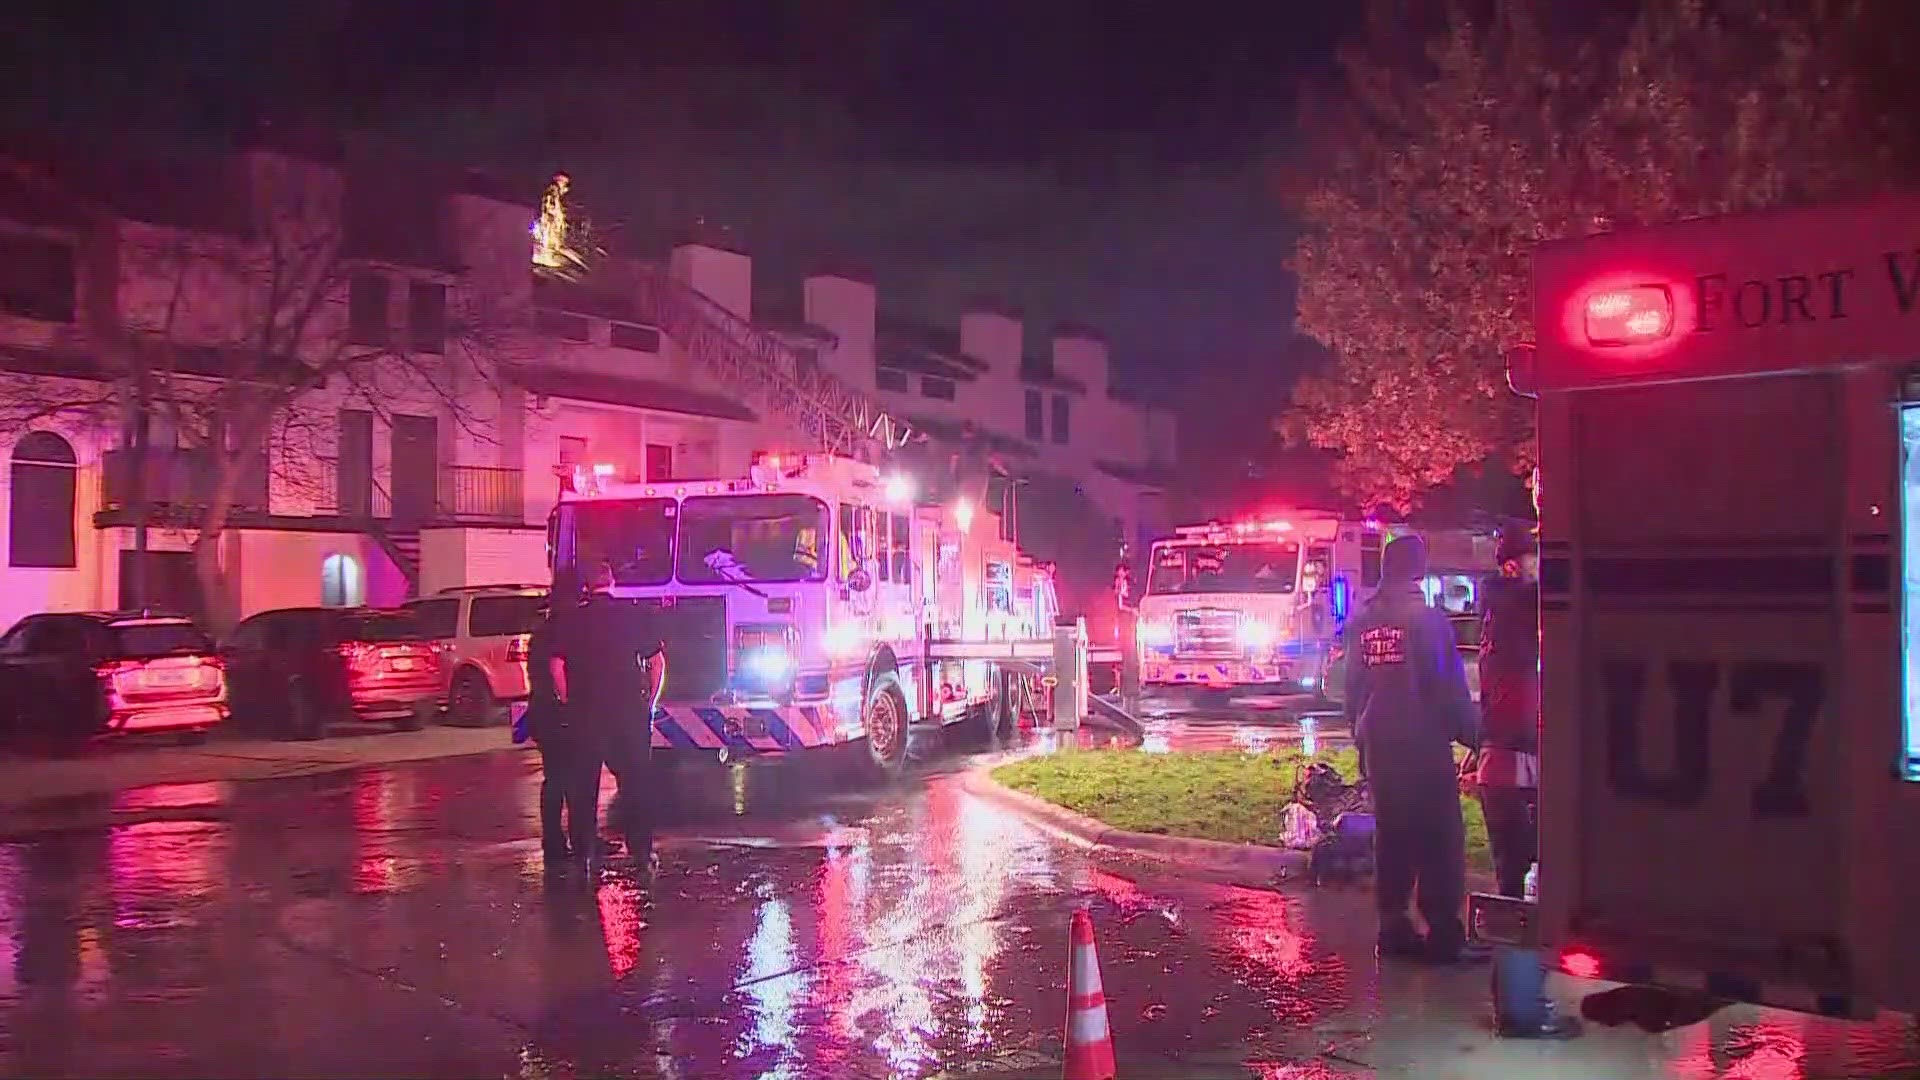 Firefighters responded to a fire at the Tides of Meadowbrook apartment building on the 600 block of King George Drive Christmas Eve.